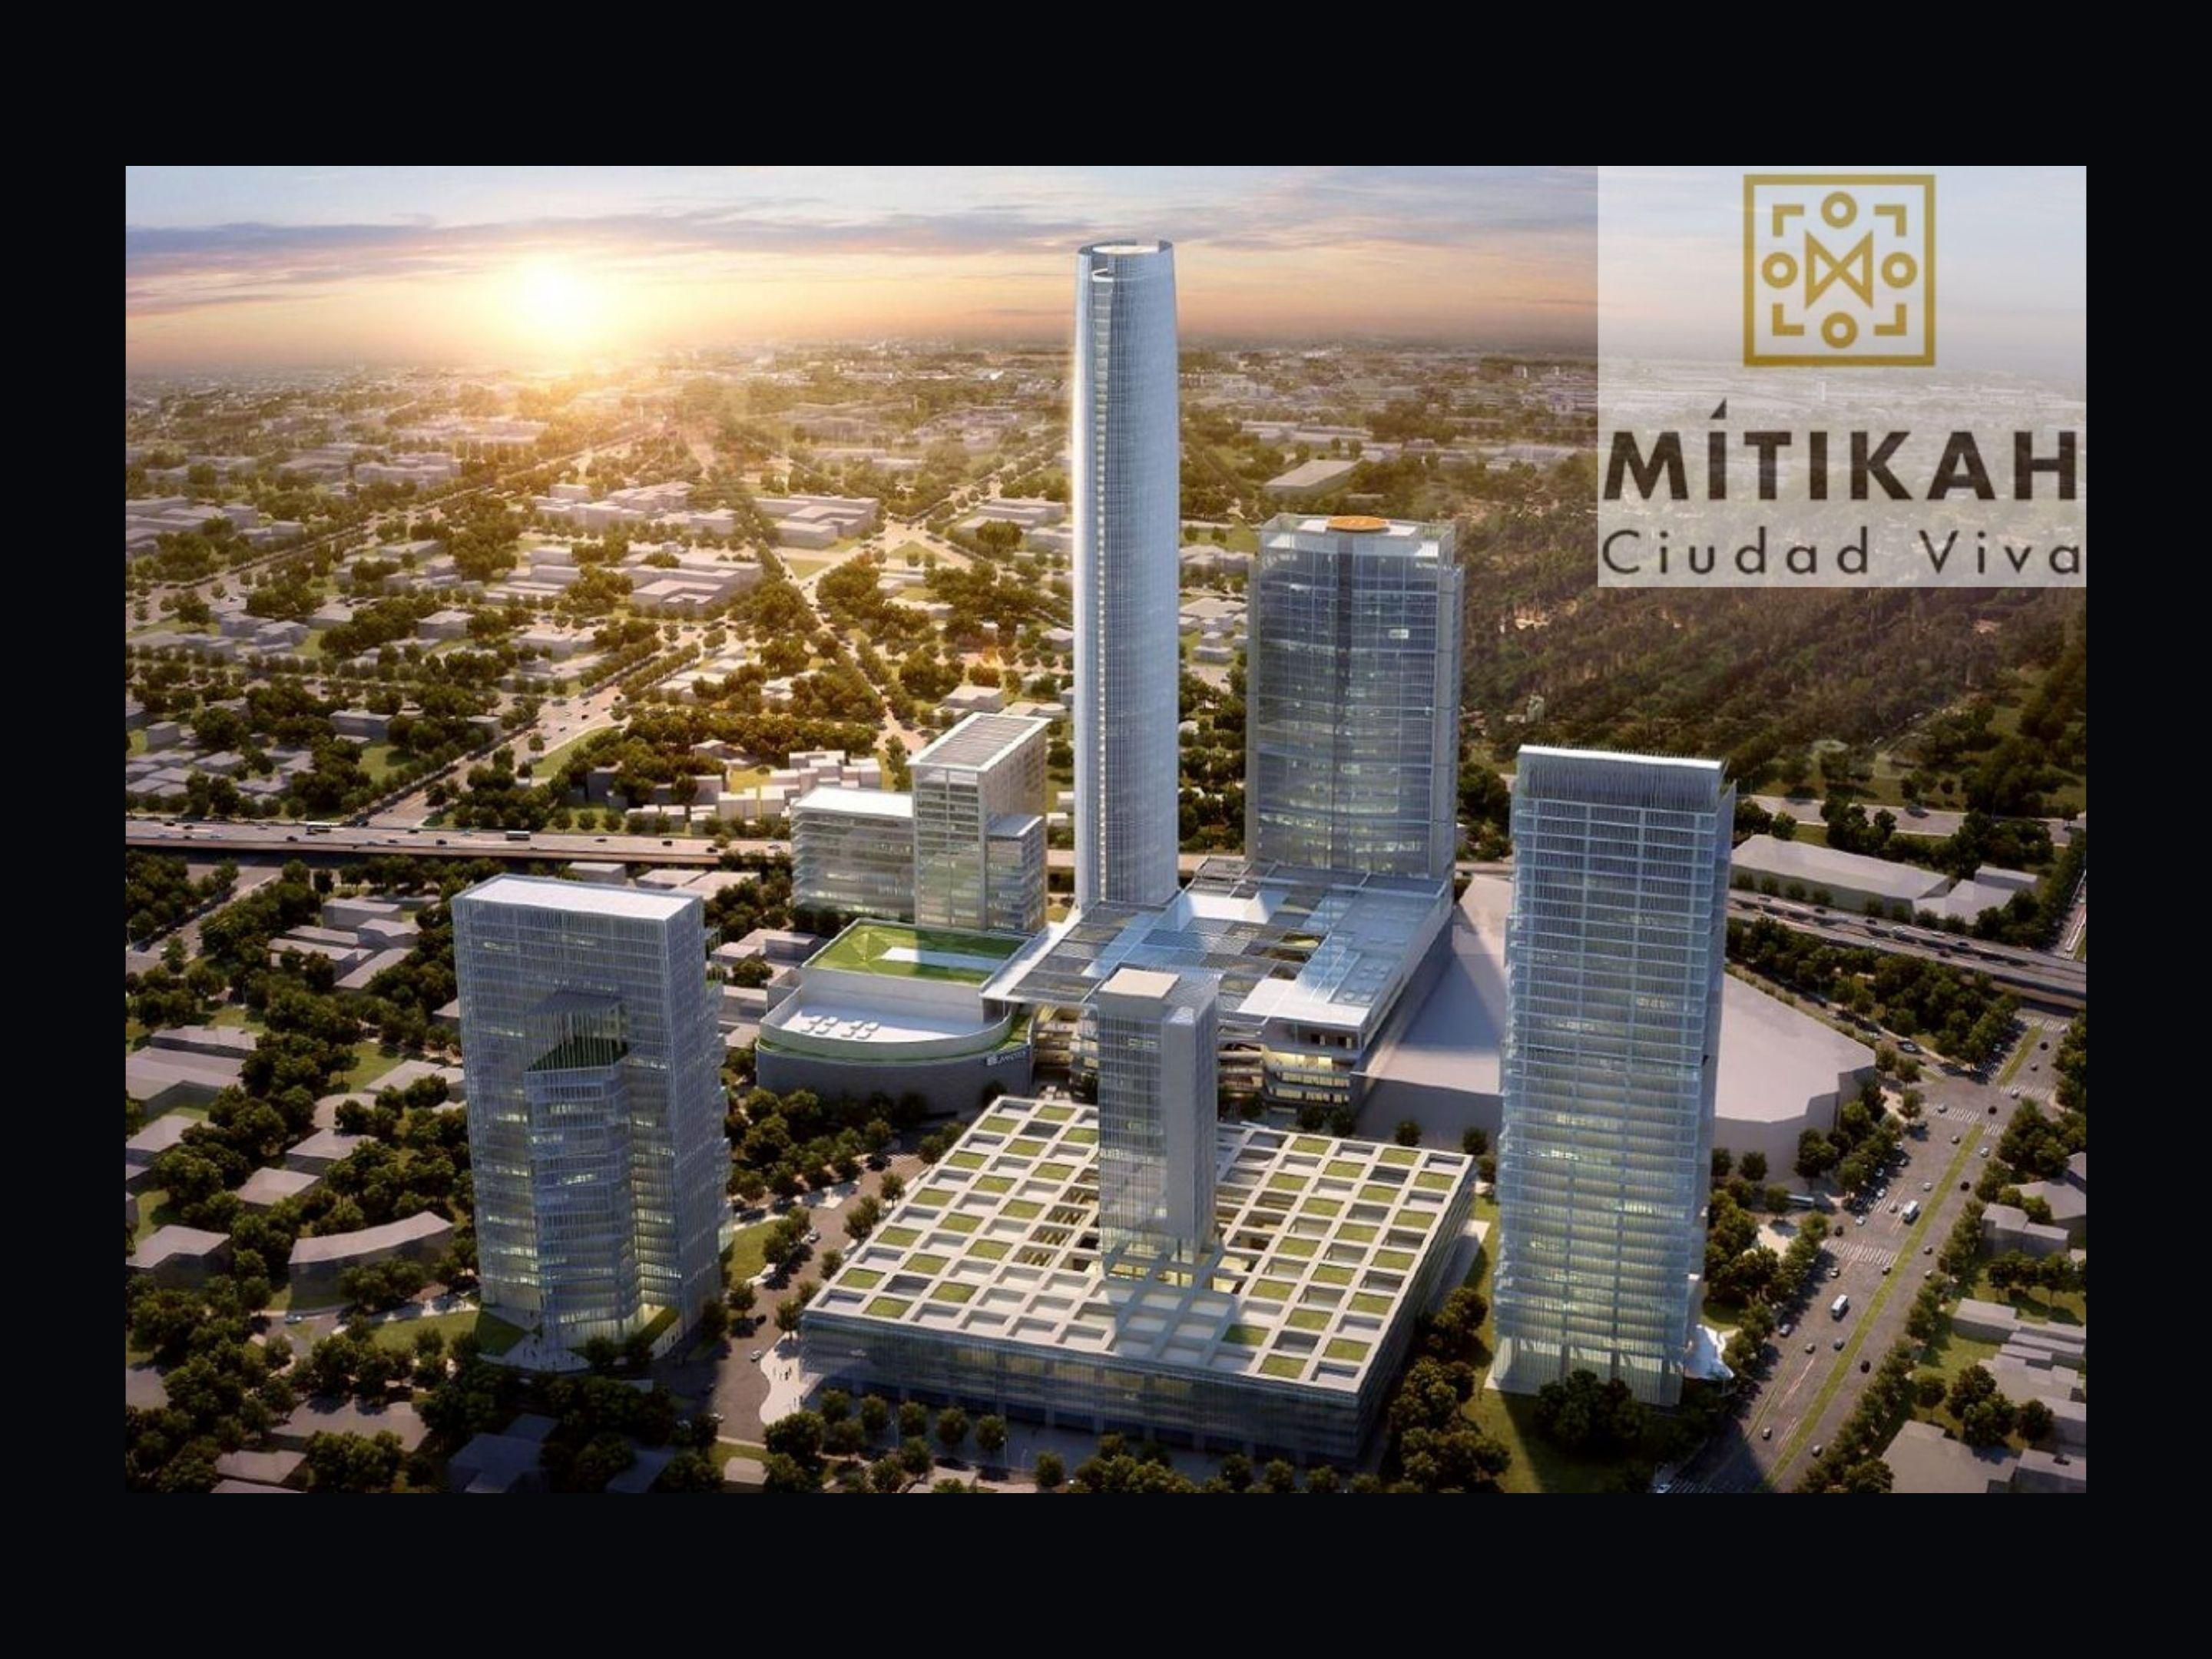 We are just 5 minutes from an urban center that houses entertainment venues, cinemas, gyms, restaurants, well-known brand stores, as well as a service area with a supermarket, an office tower designed by the renowned architect Richard Meier and a clinic with medical consultants.